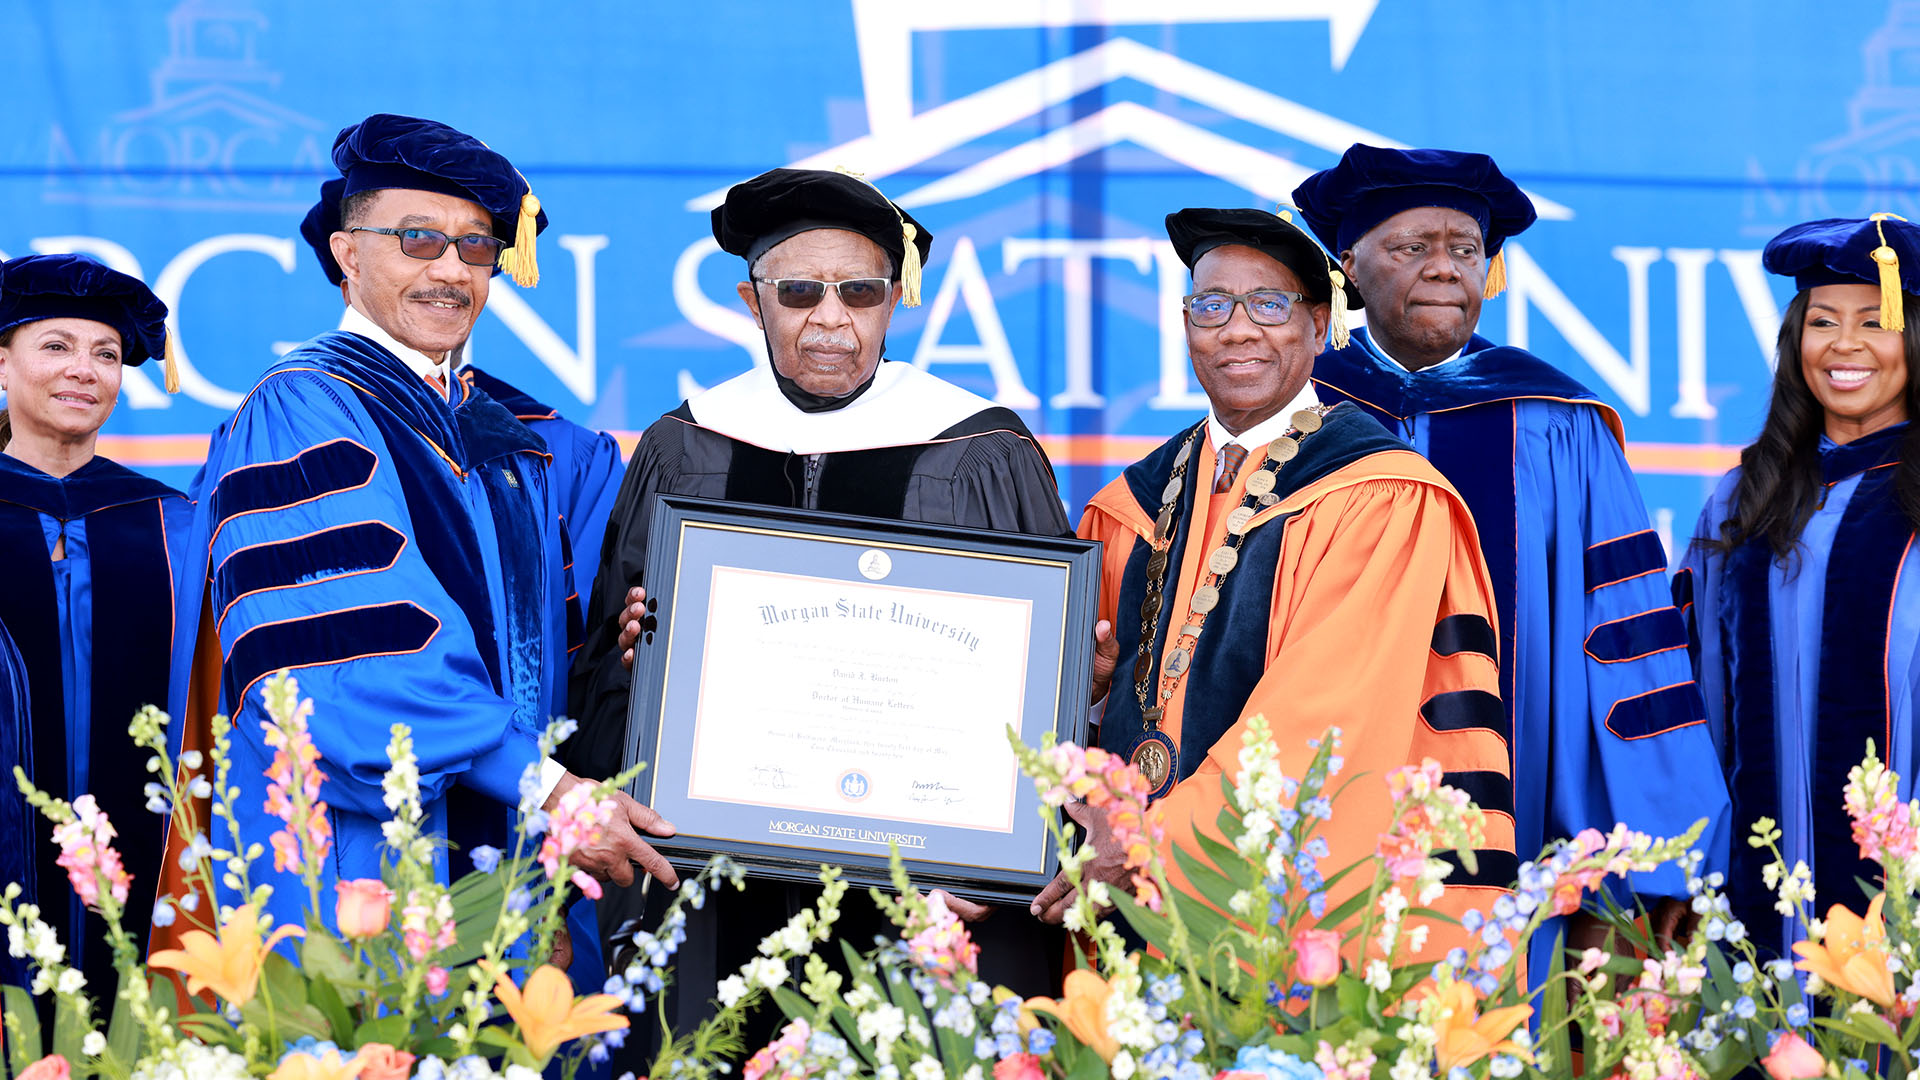 David Burton (MSU Class of 1967) received a Doctor of Humane Letters 